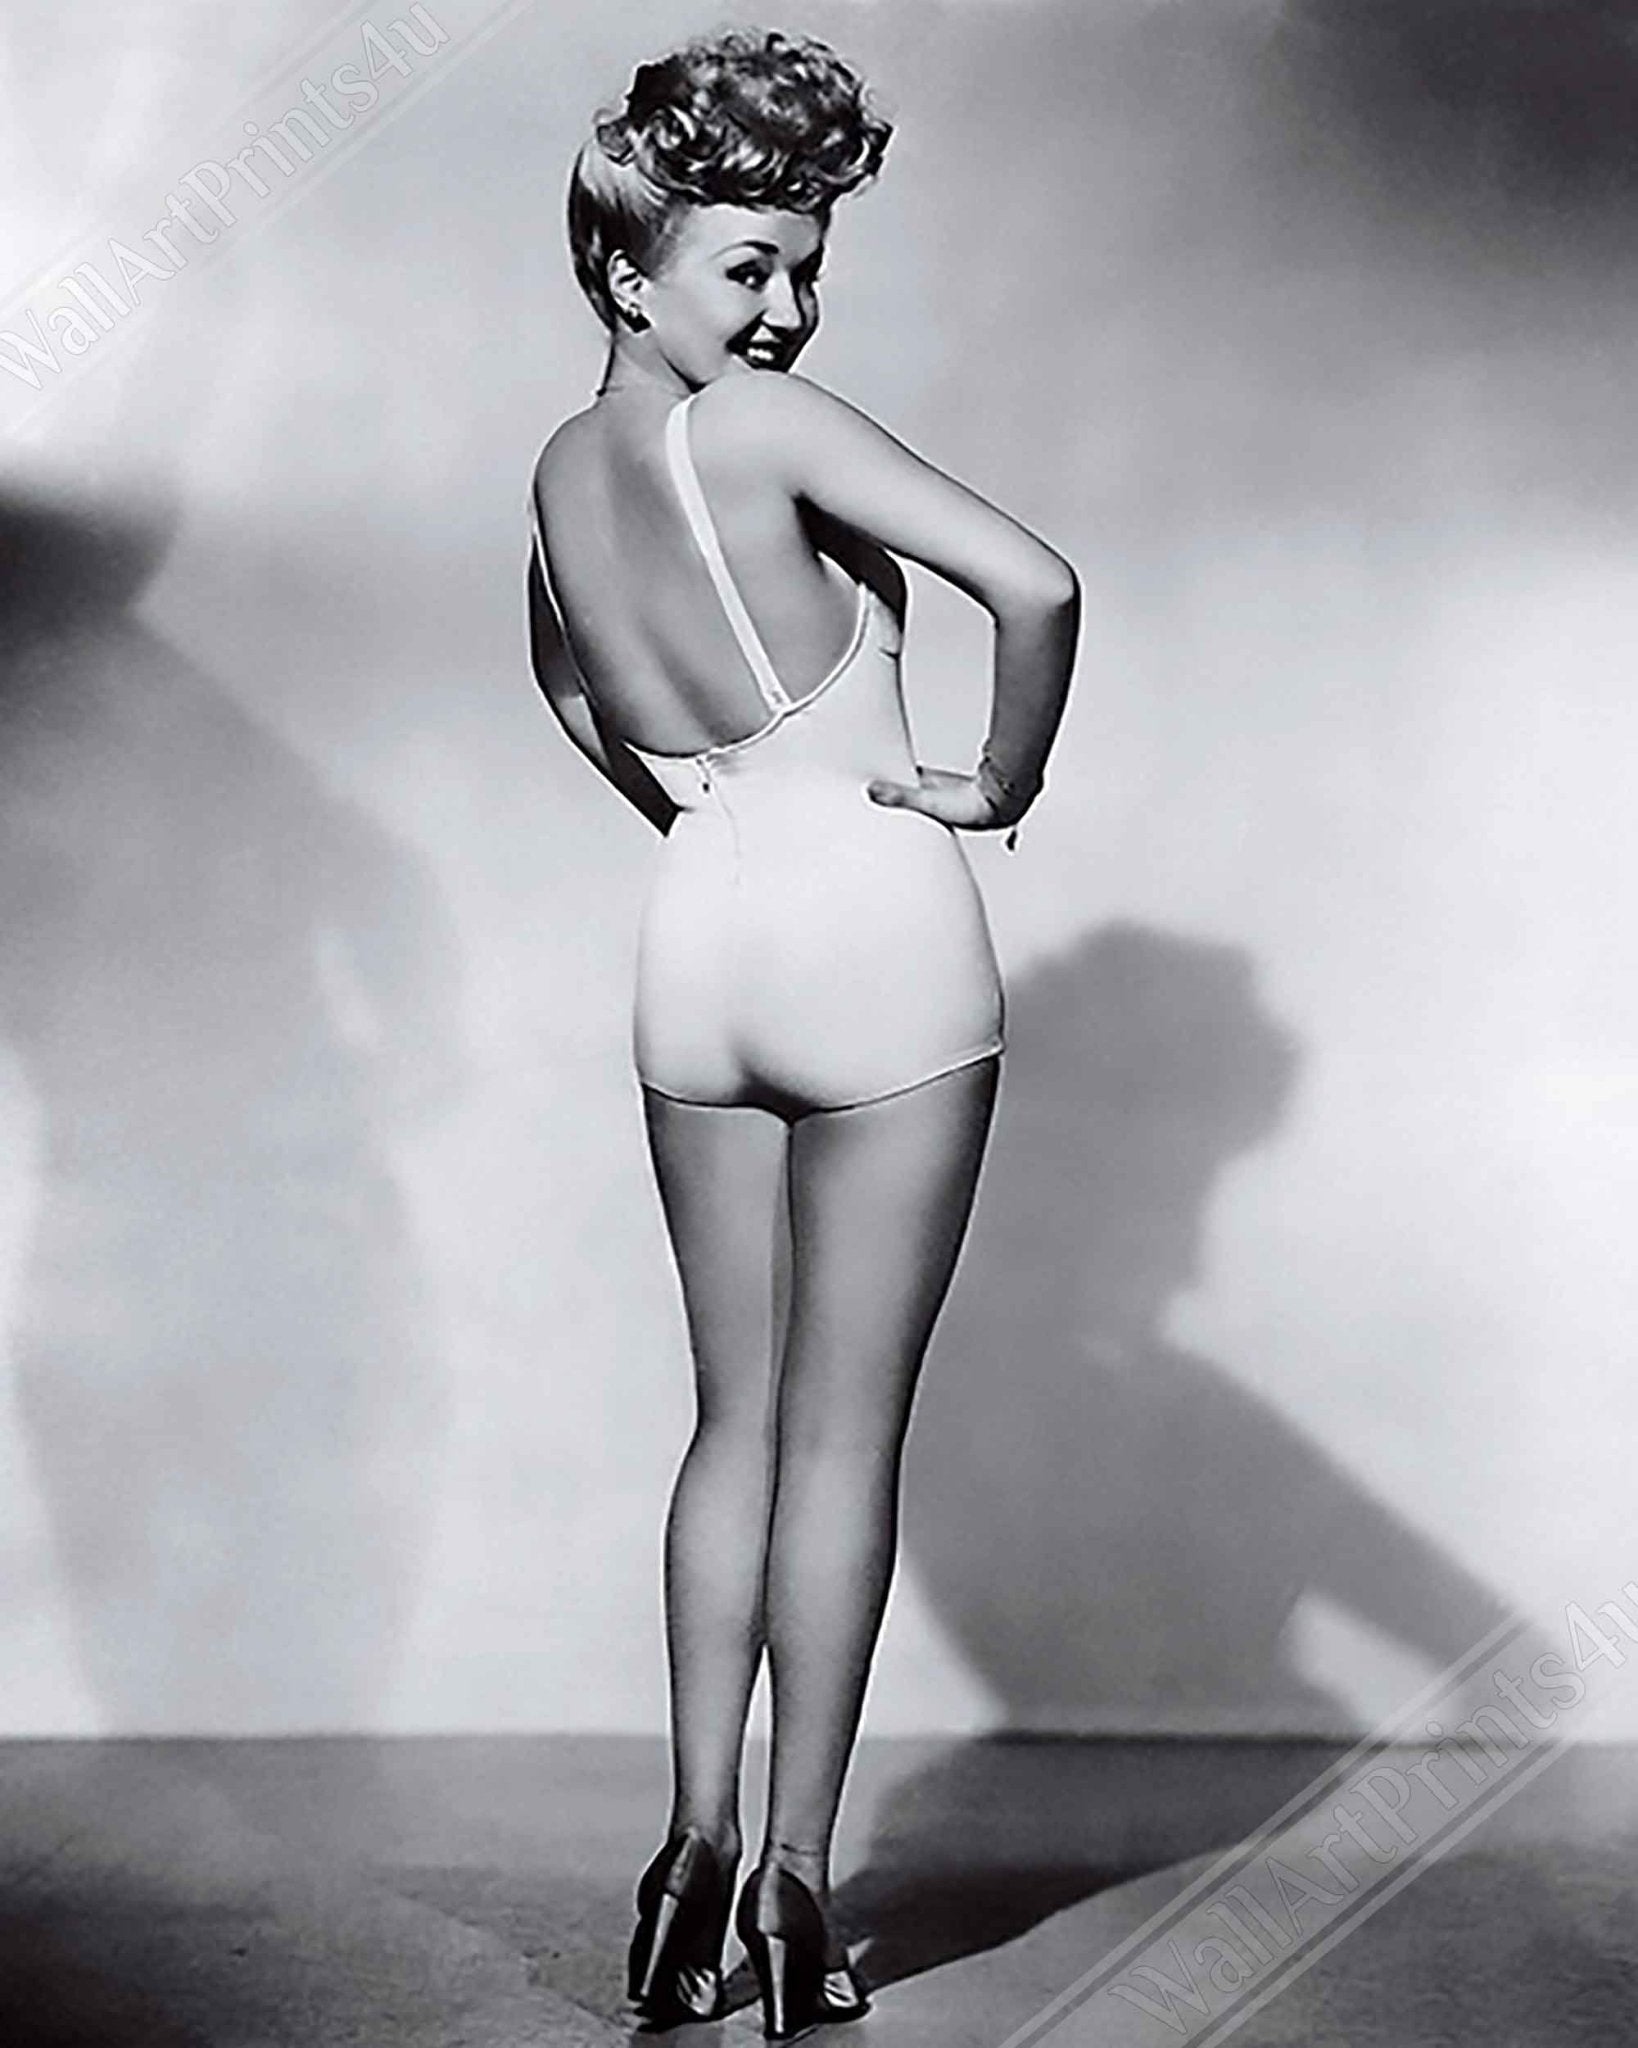 Betty Grable Swimsuit Poster, Famous Photo Print From 1943, First Pin Up Girl, Inspired American Soldiers In Ww2. - WallArtPrints4U